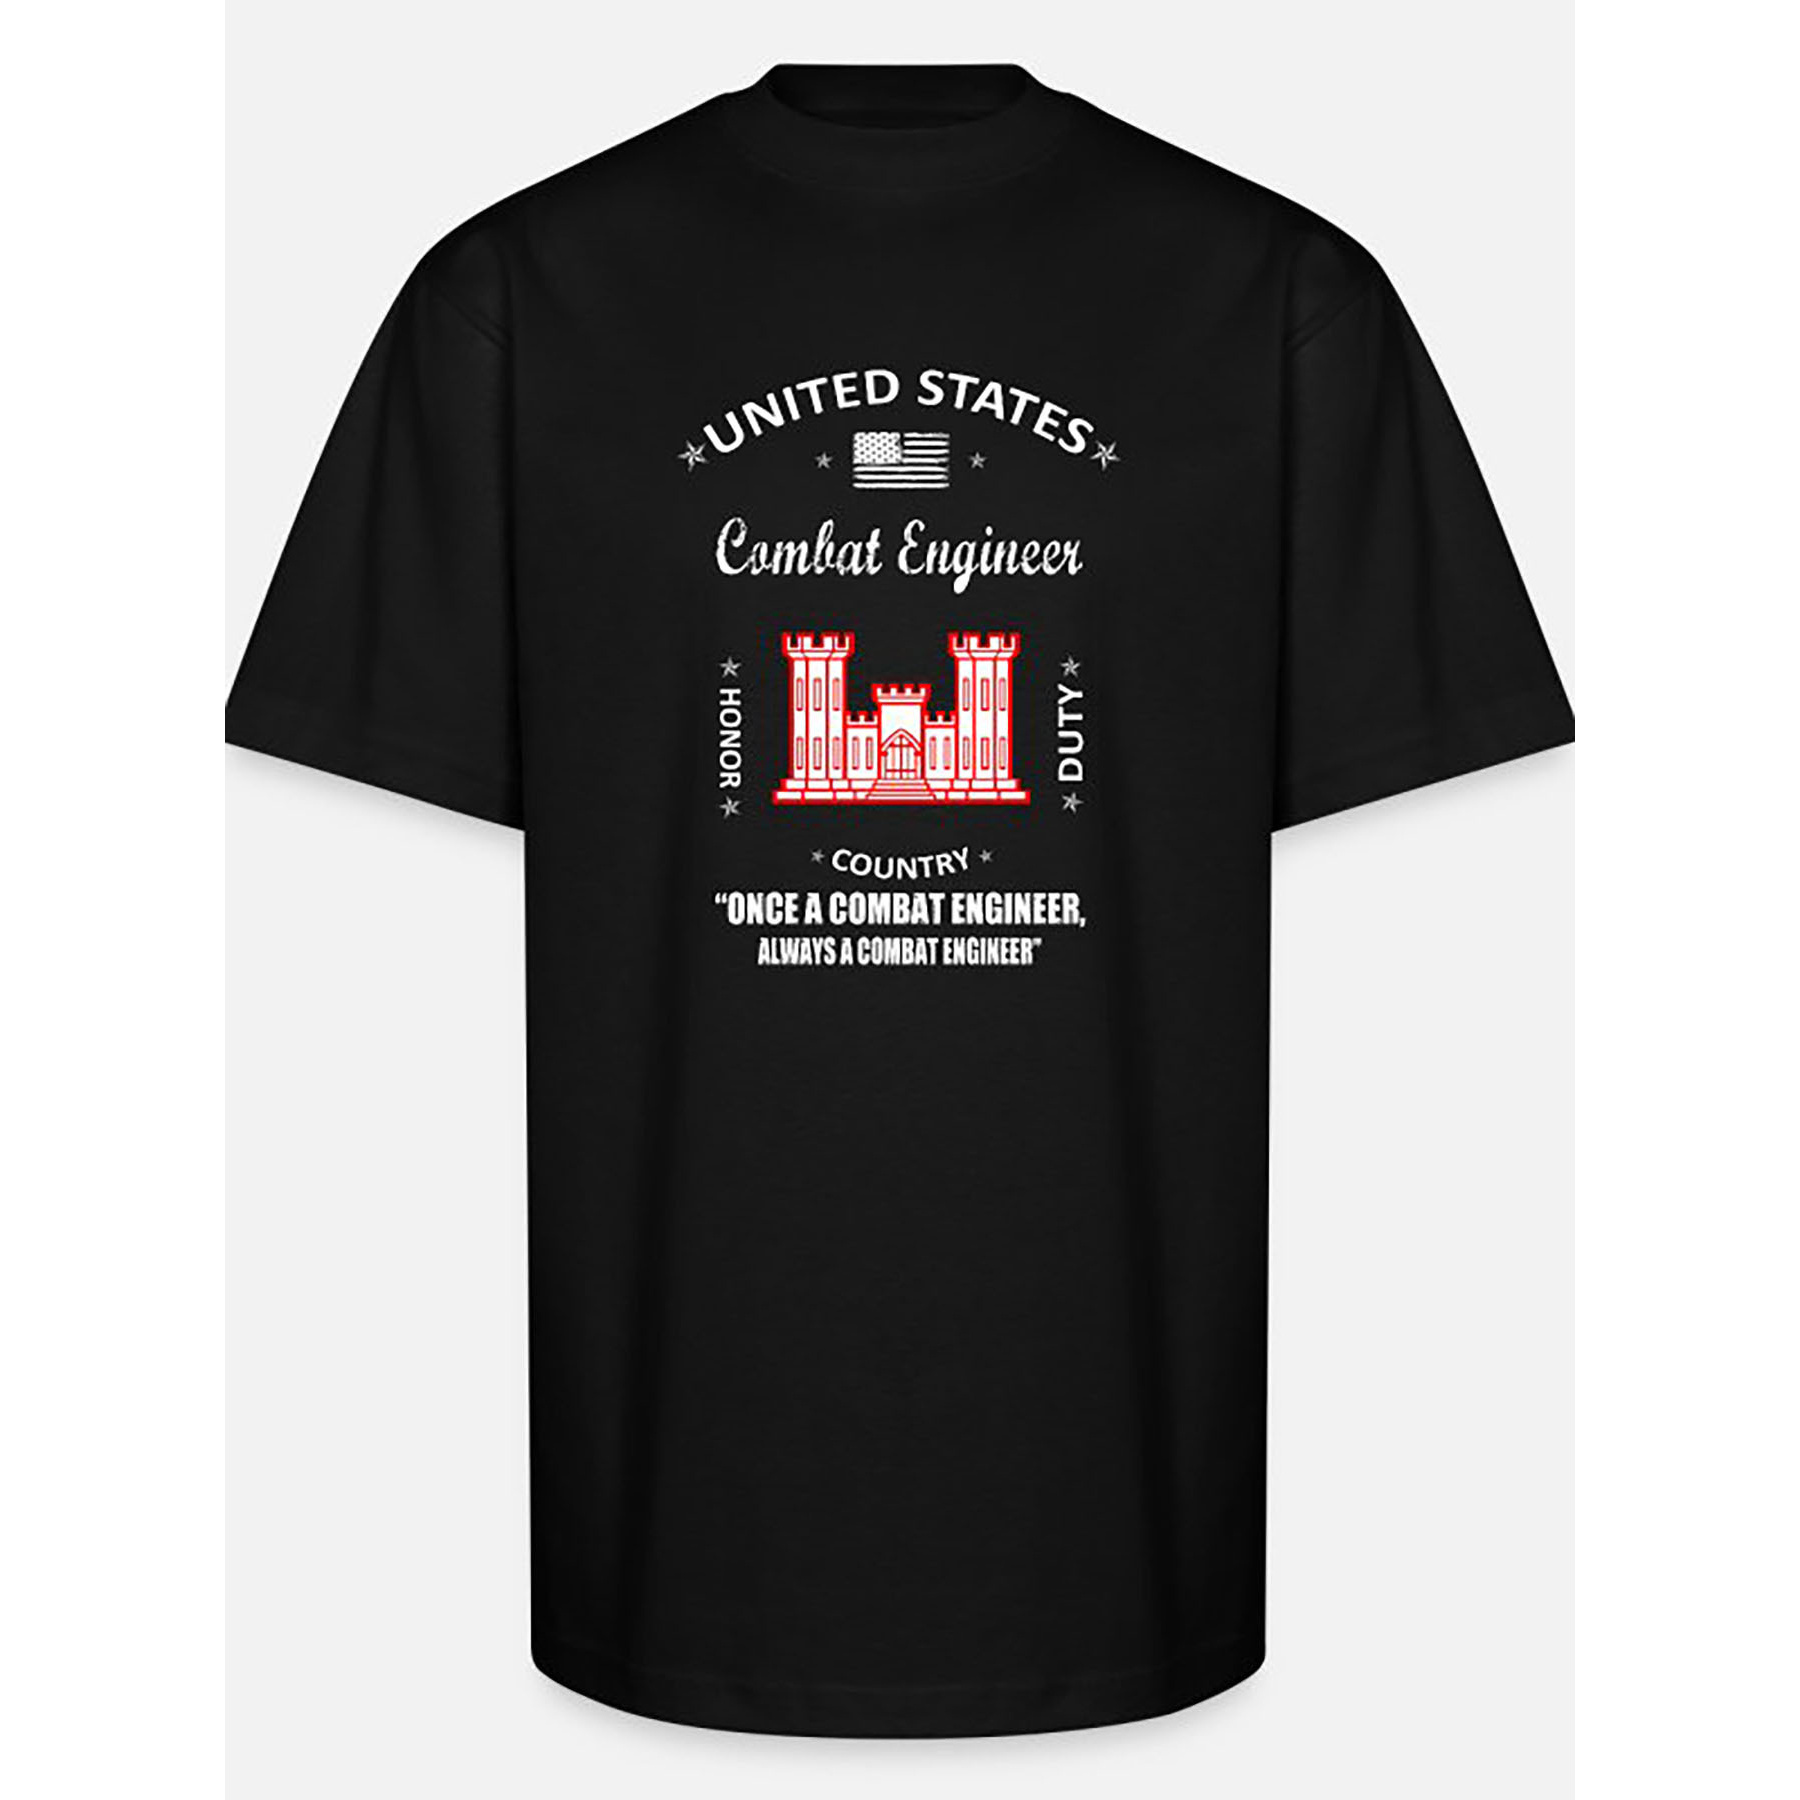 

Combat Engineer, Us Army Combat Engineer, Army Com-5149 Funny Men's Short Sleeve Graphic T-shirt Collection Black